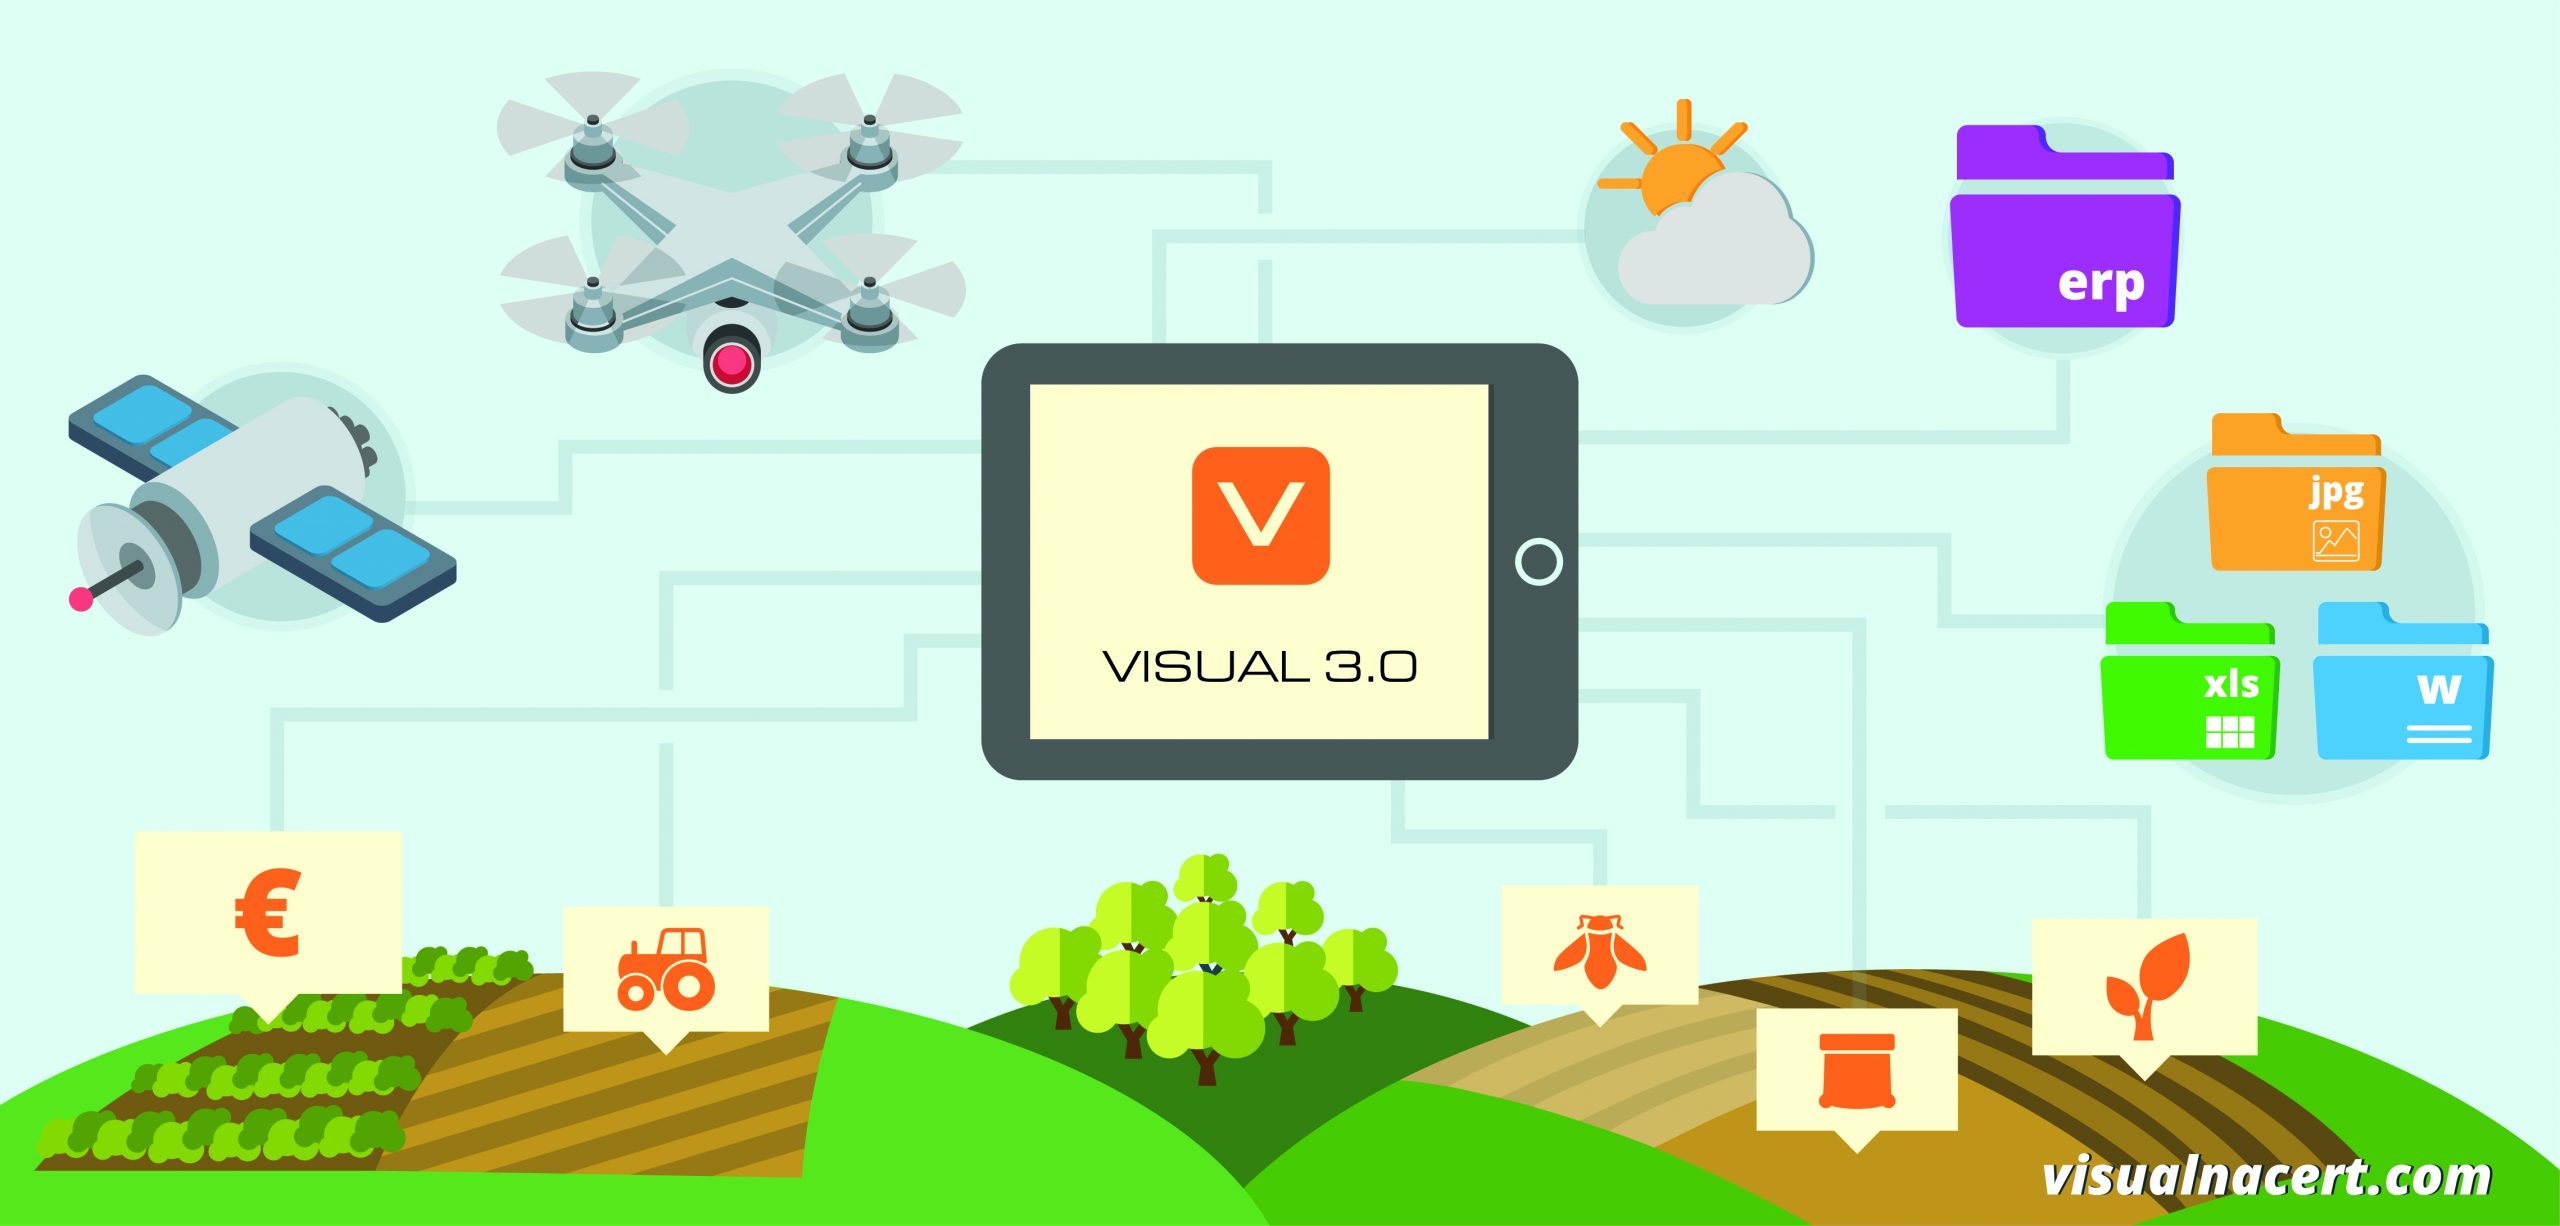 Visual 3.0 is the first platform developed with geolocation technology, connection and analysis of ‘big data’. It allows for planning, forecasting and monitoring the progress of harvesting while promoting food security, quality and productivity.